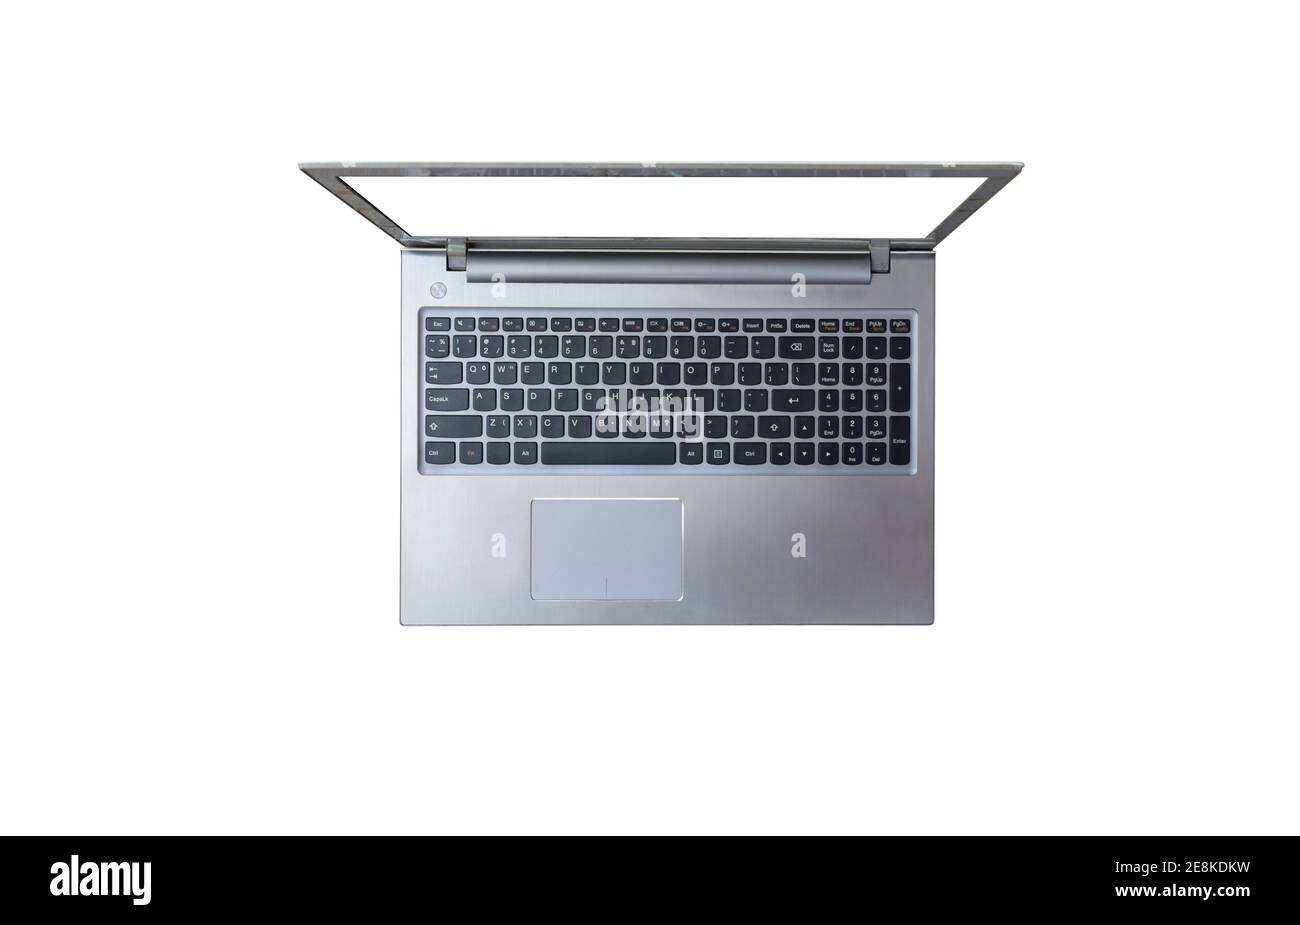 Top view of silver laptop on white background with clipping path. Stock Photo